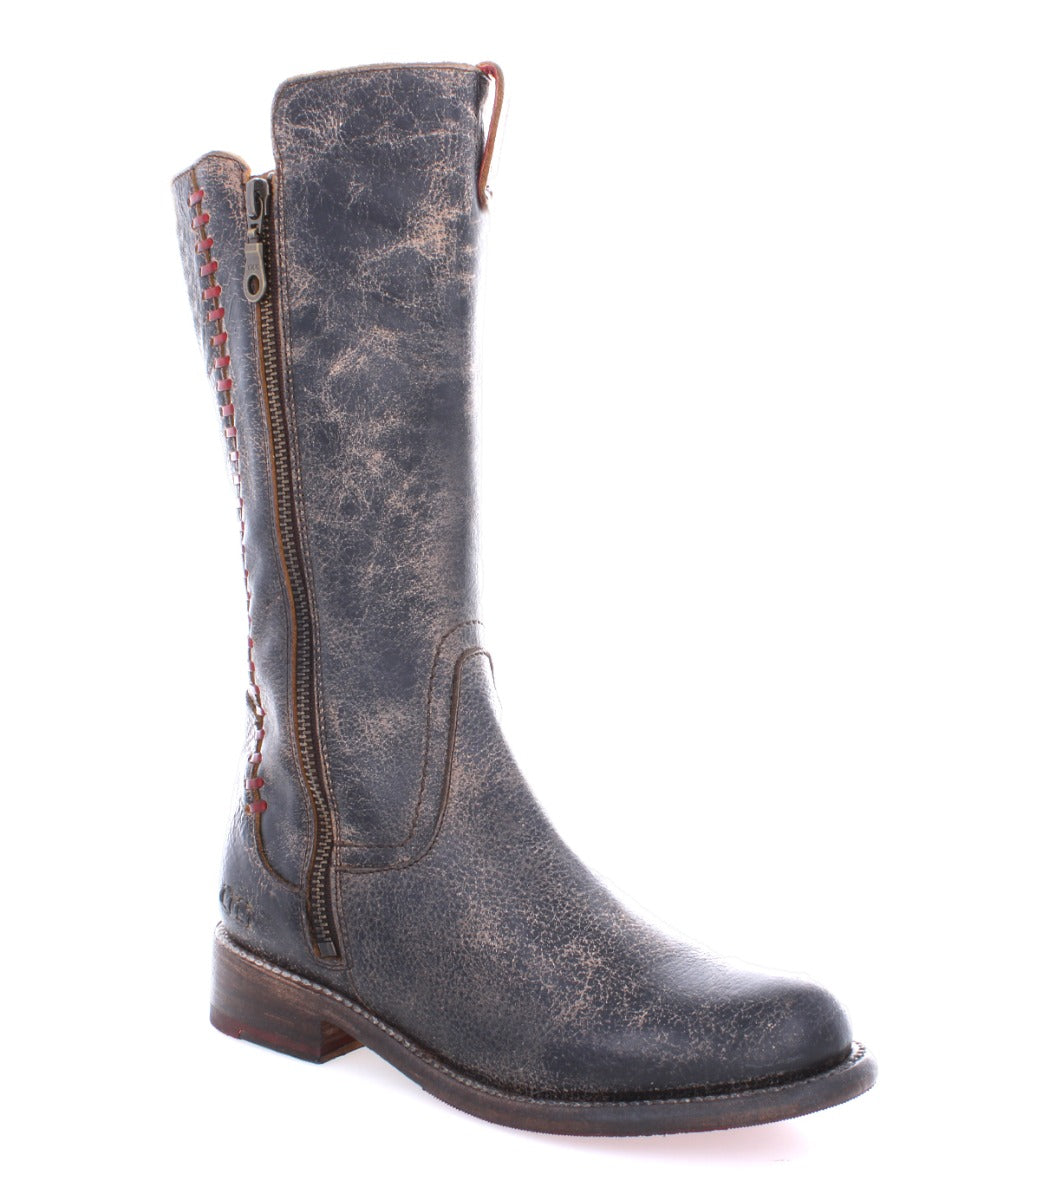 A pair of Bed Stu Latifah women's boots with a zipper on the side.